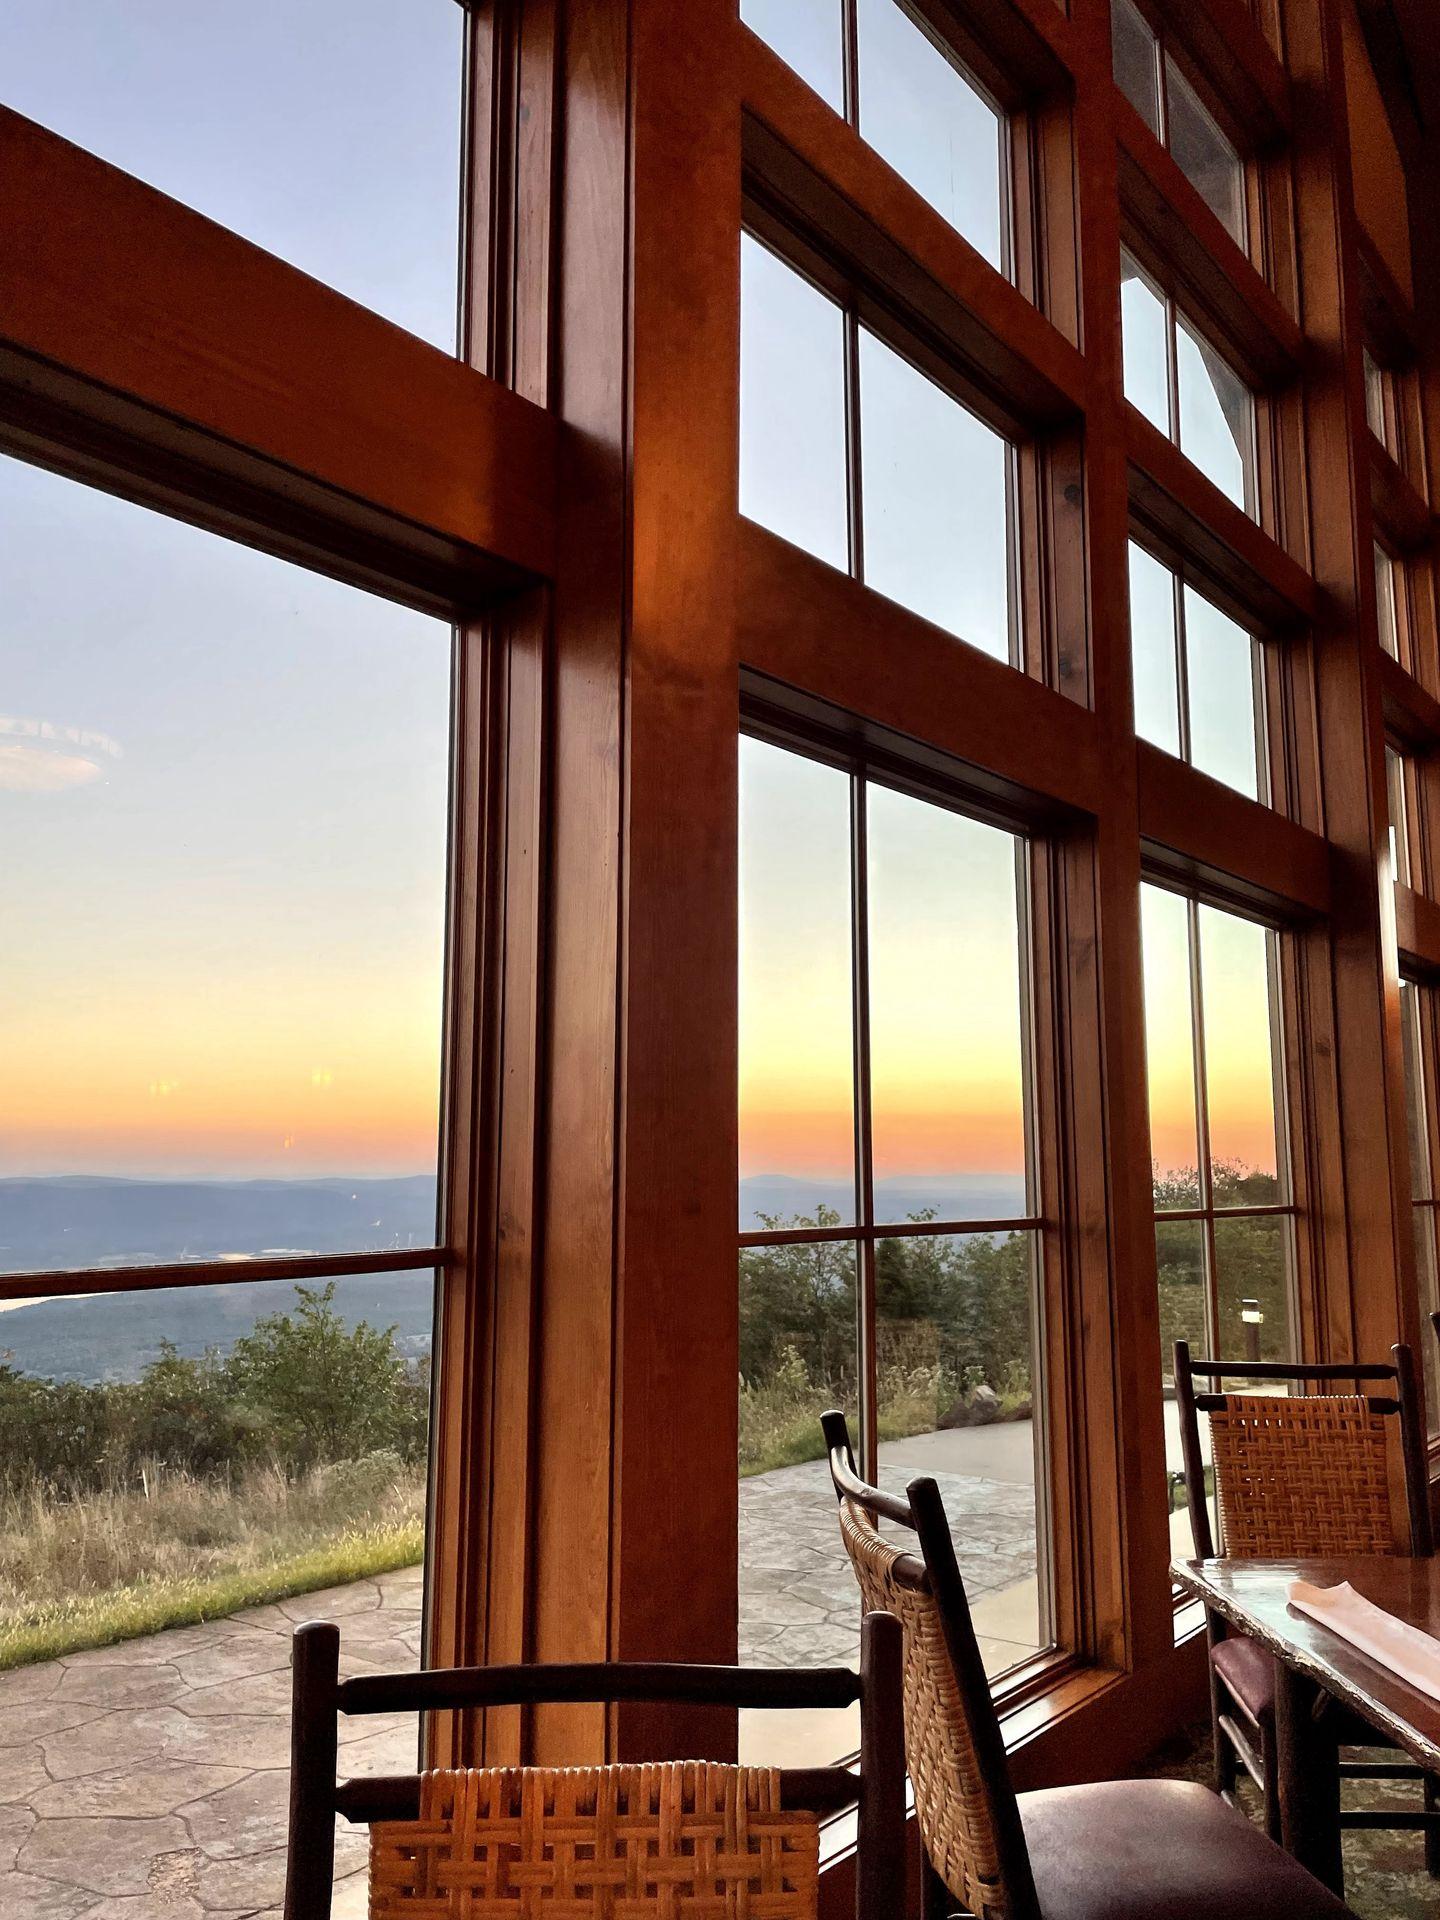 The sunset from the dining room in the Mount Magazine Lodge.